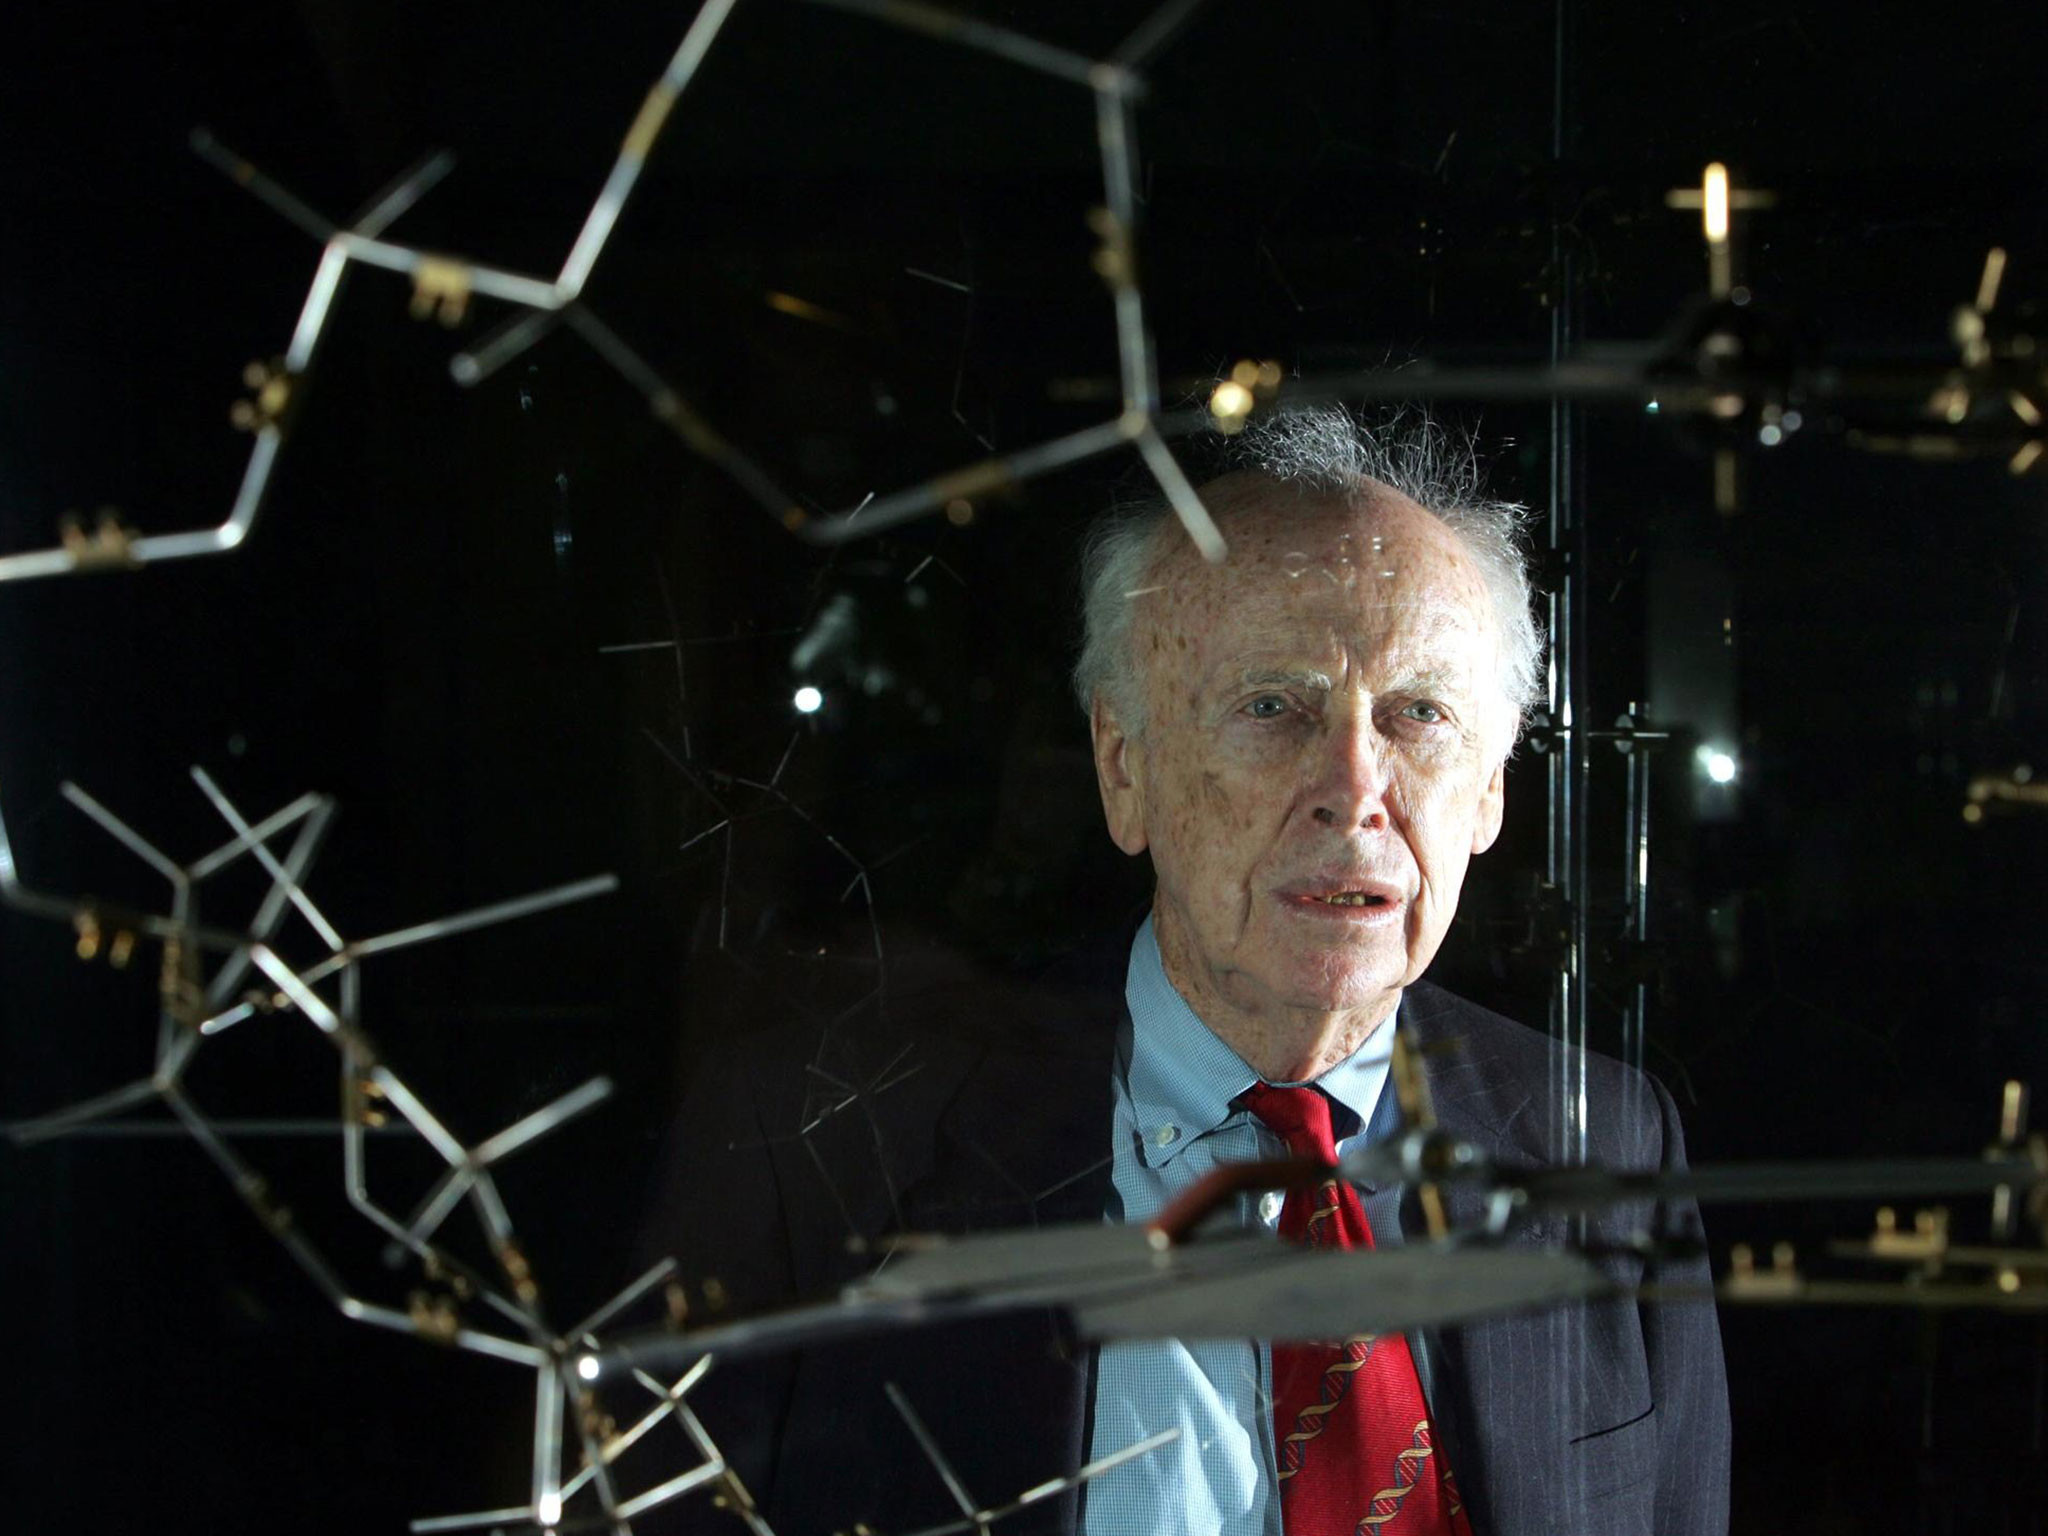 2048x1536 James Watson profile: A human riddle wrapped in a DNA double helix | The  Independent